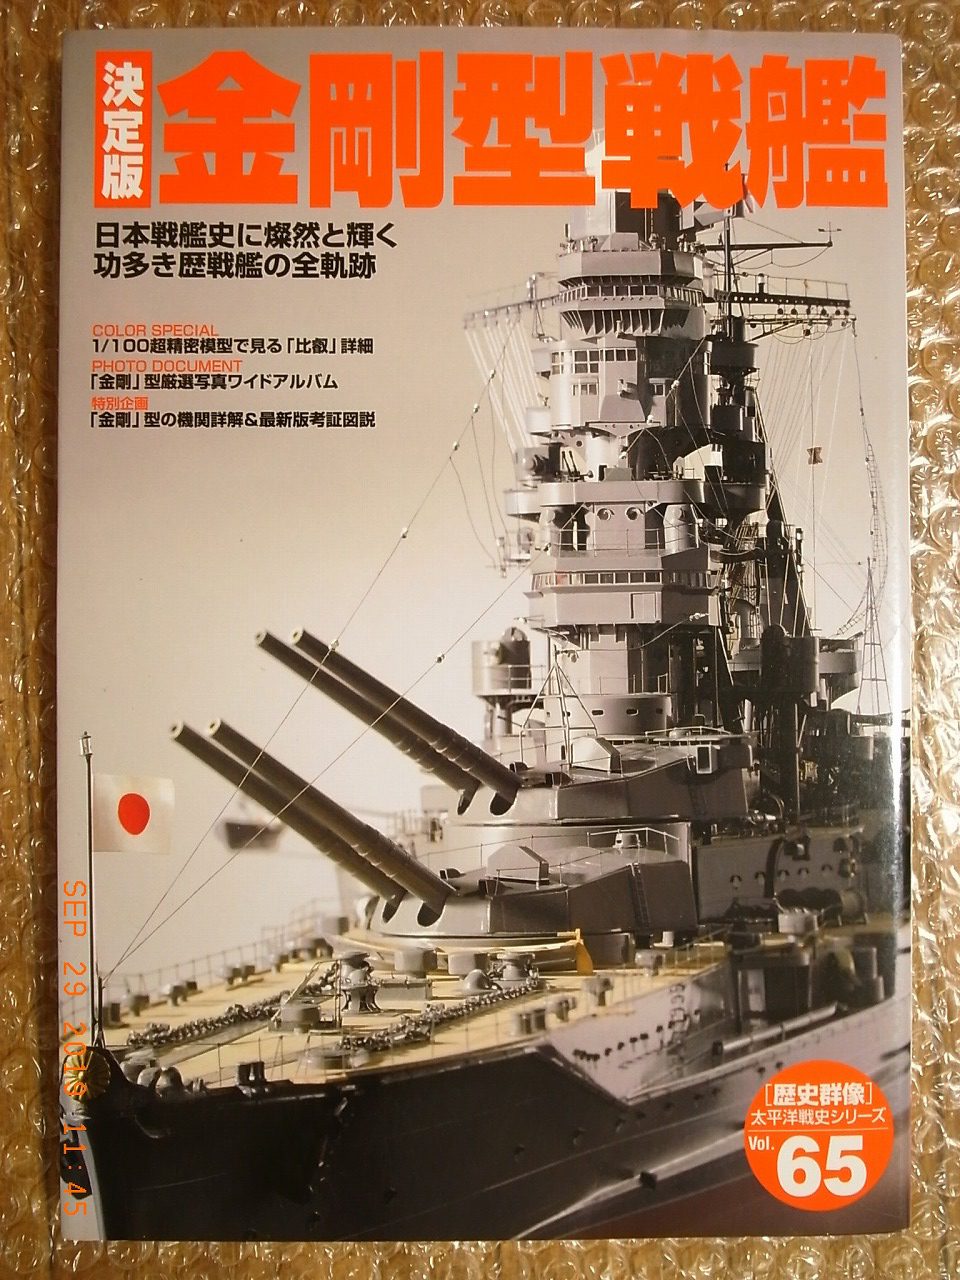 Pictorial Book Japan The Imperial Japanese Navy in Pacific War